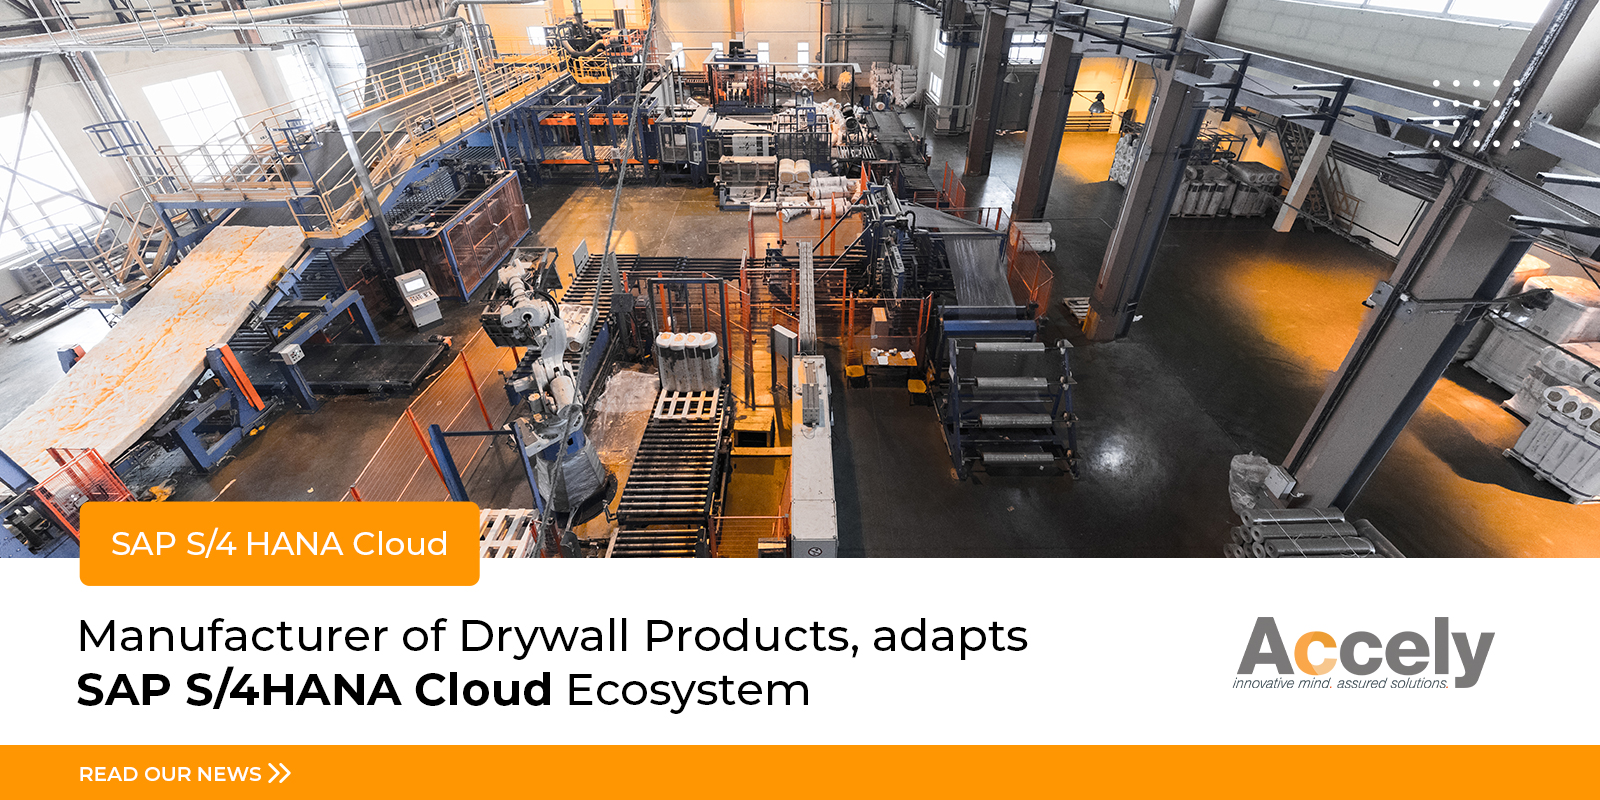 Manufacturer of Drywall Products adapts SAP S/4HANA Cloud Ecosystem